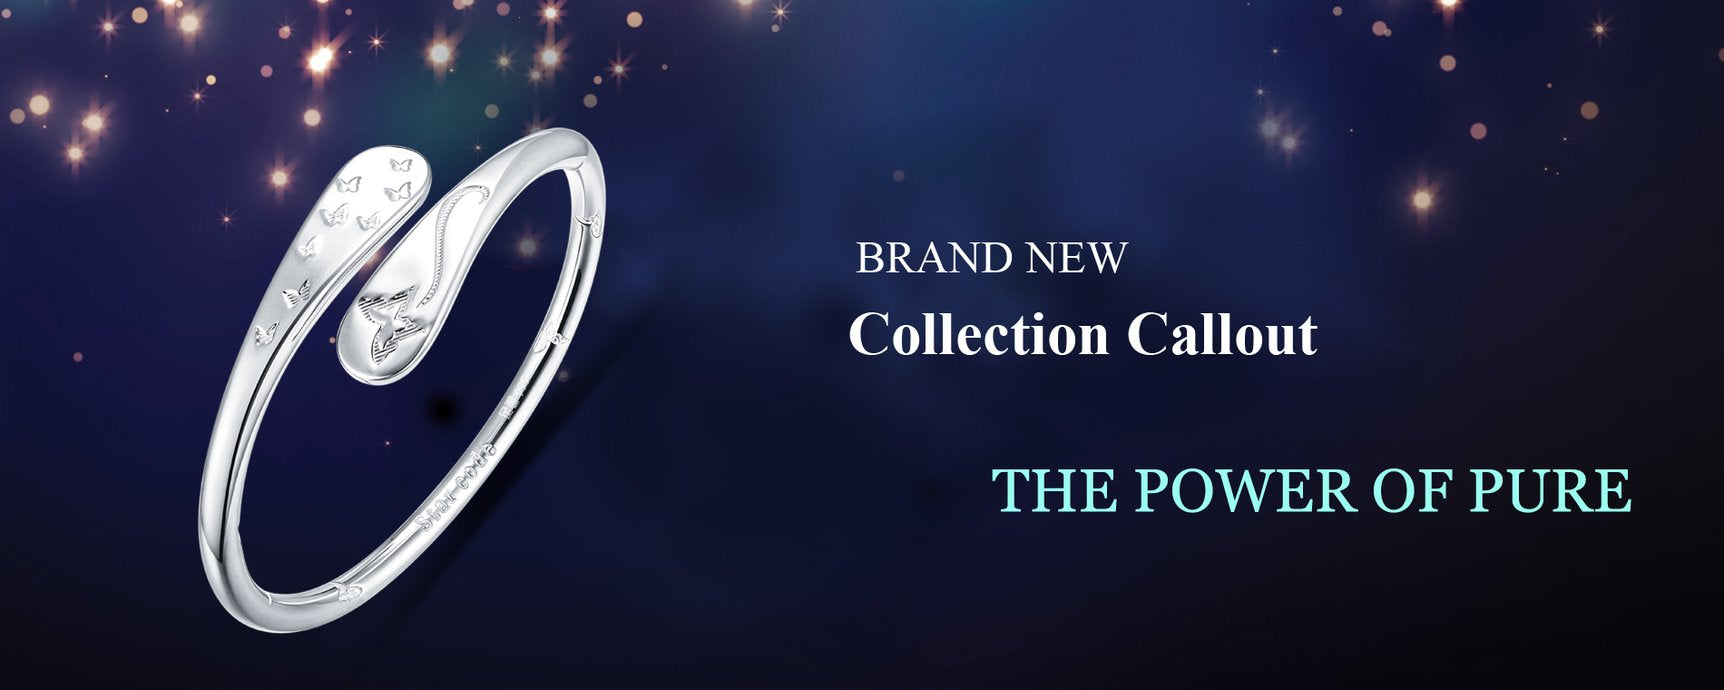 The Power of Pure Collection Callout banner